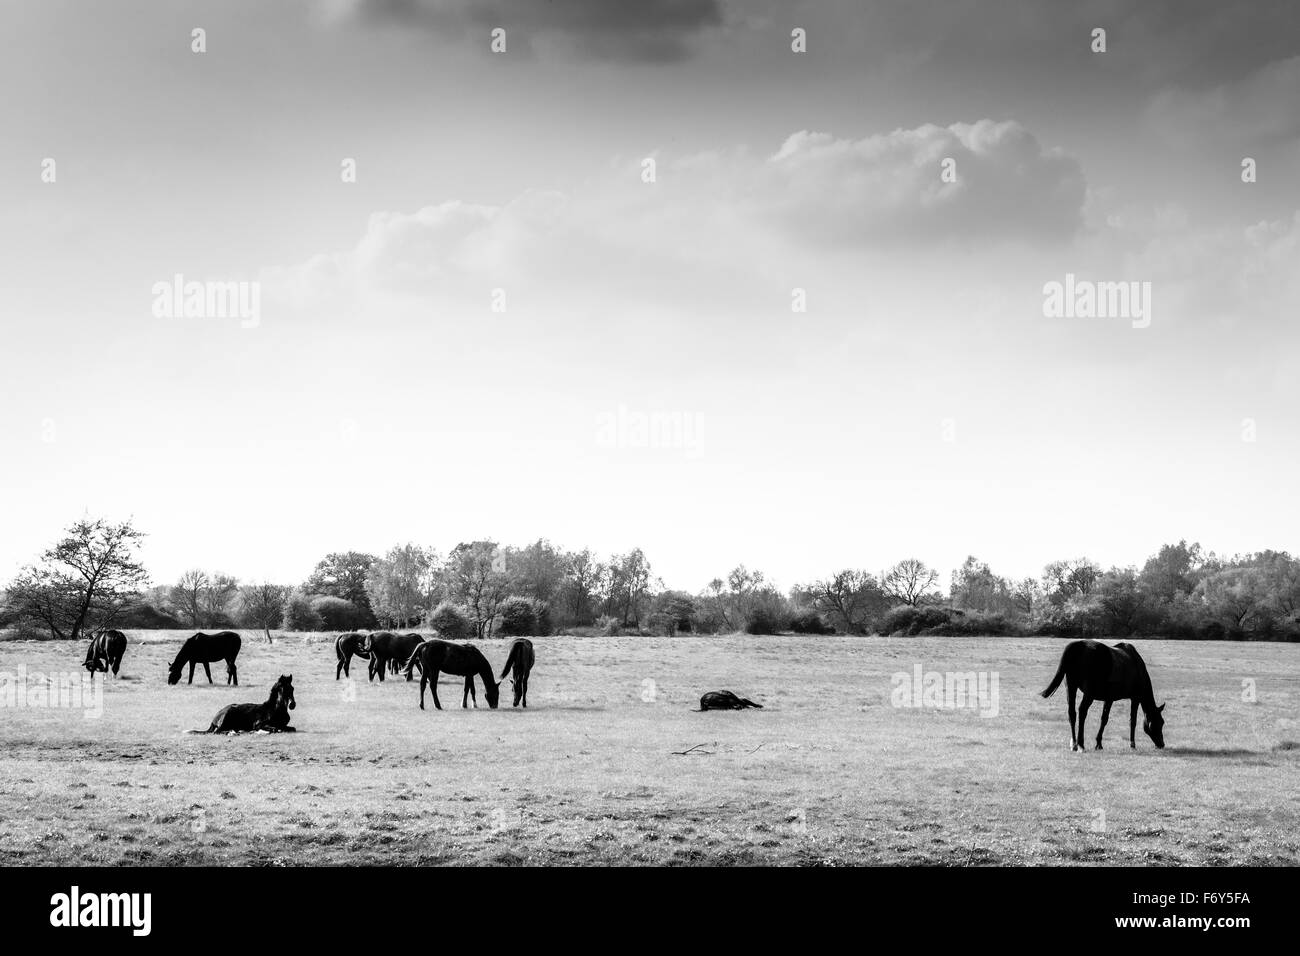 essex countryside  image with a group of horses Stock Photo